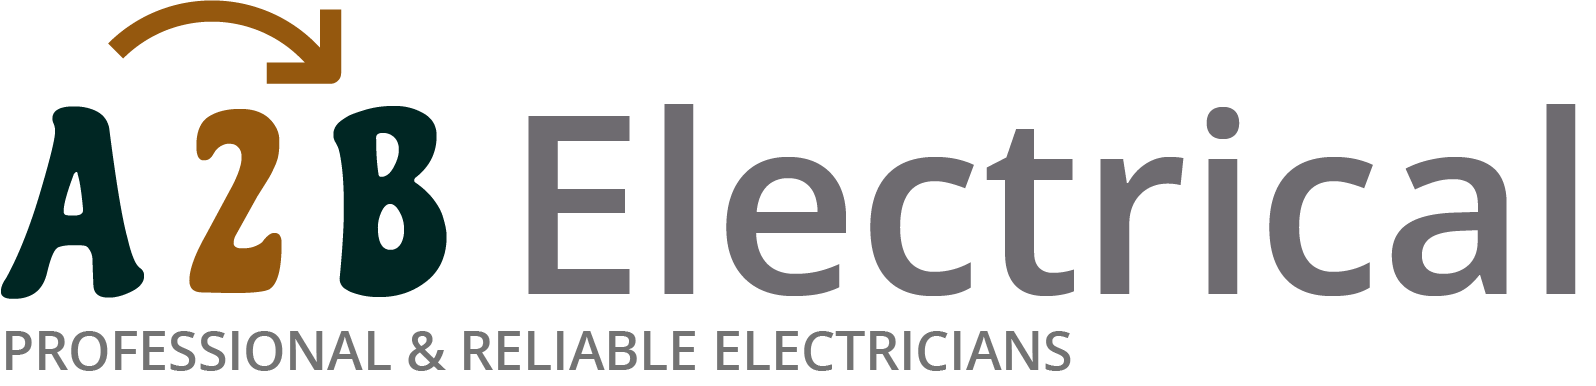 If you have electrical wiring problems in Lee, we can provide an electrician to have a look for you. 